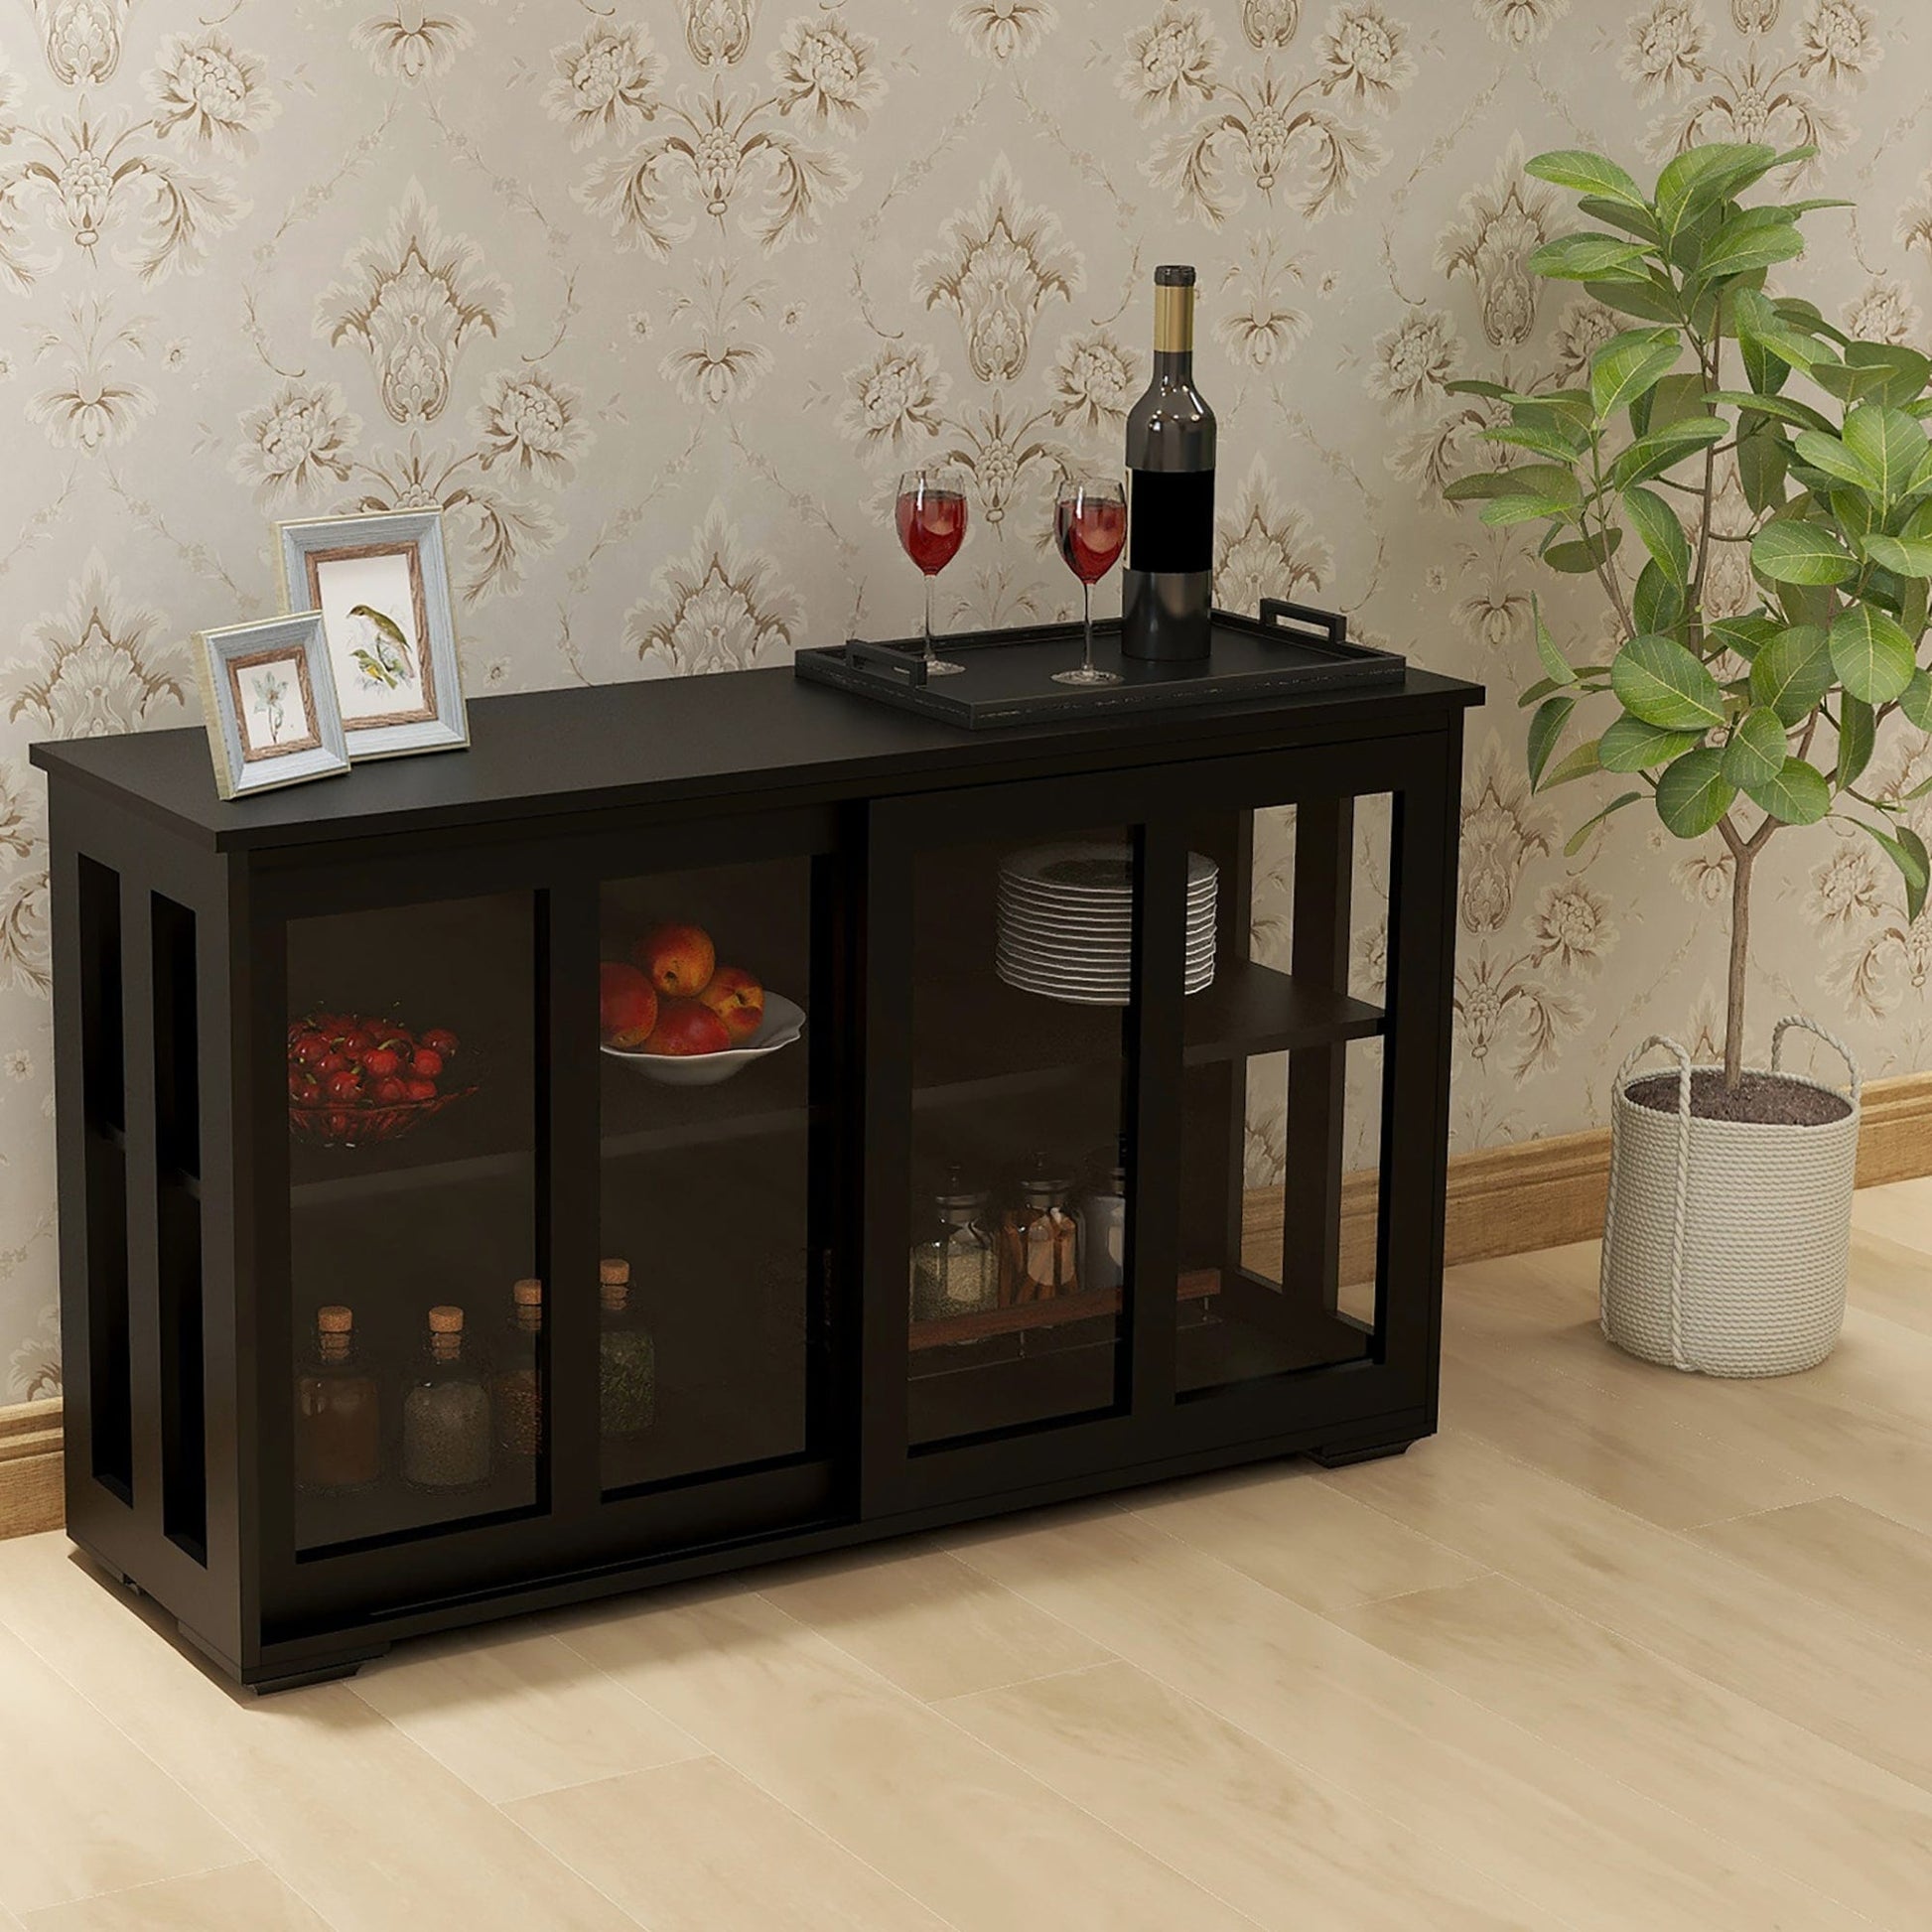 1st Choice Furniture Direct Cupboard 1st Choice Kitchen Storage Stand Cupboard With Glass Door in Black